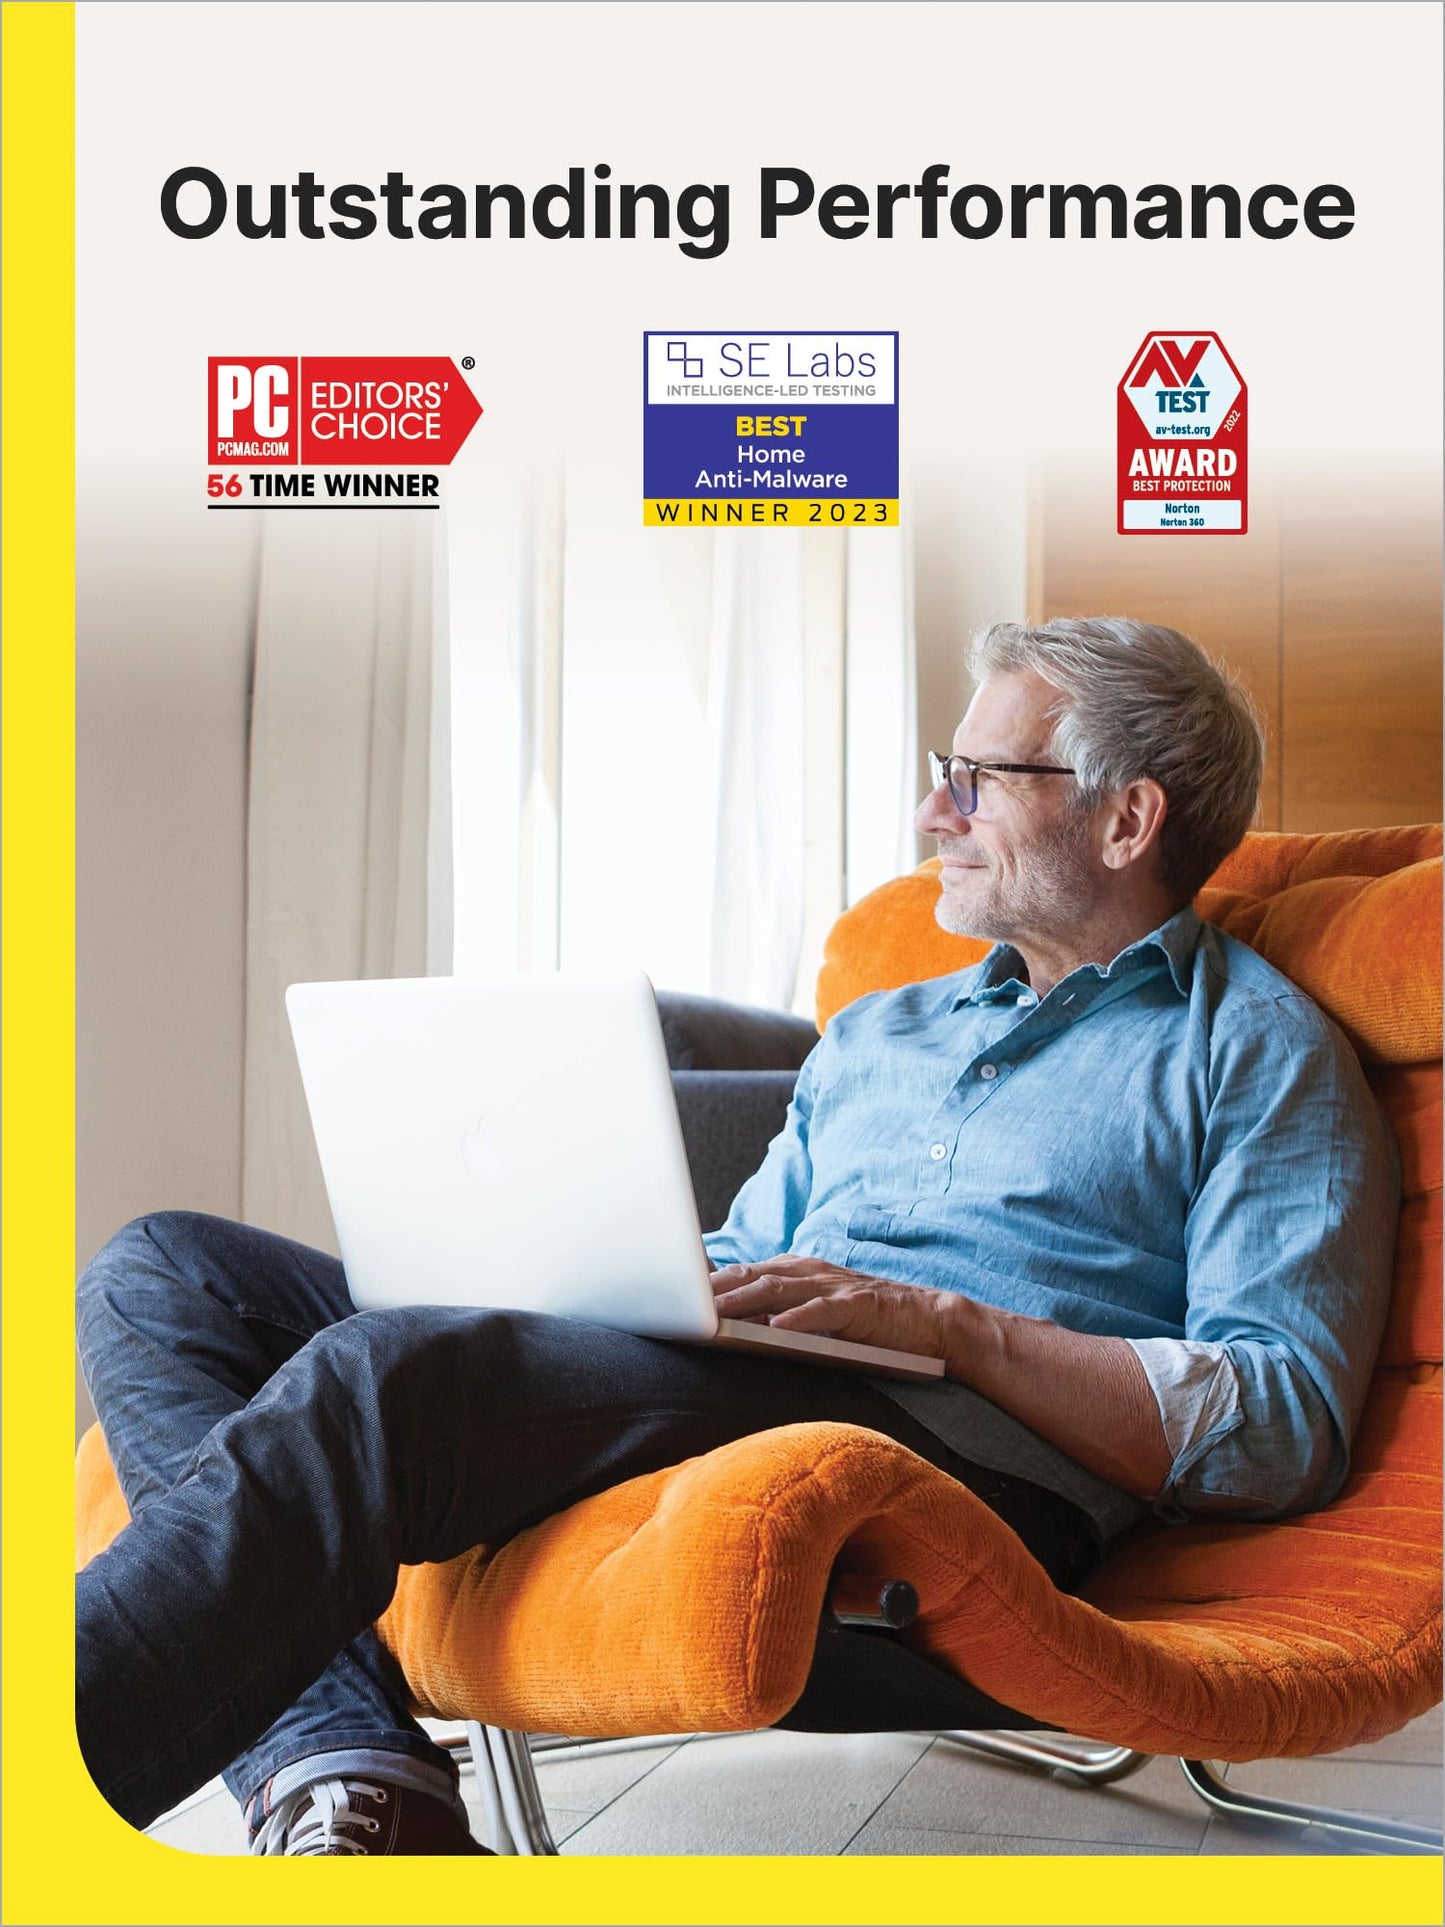 Norton 360 Standard 2024, Antivirus software for 1 Device with Auto Renewal – Includes VPN, PC Cloud Backup & Dark Web Monitoring [Key Card]